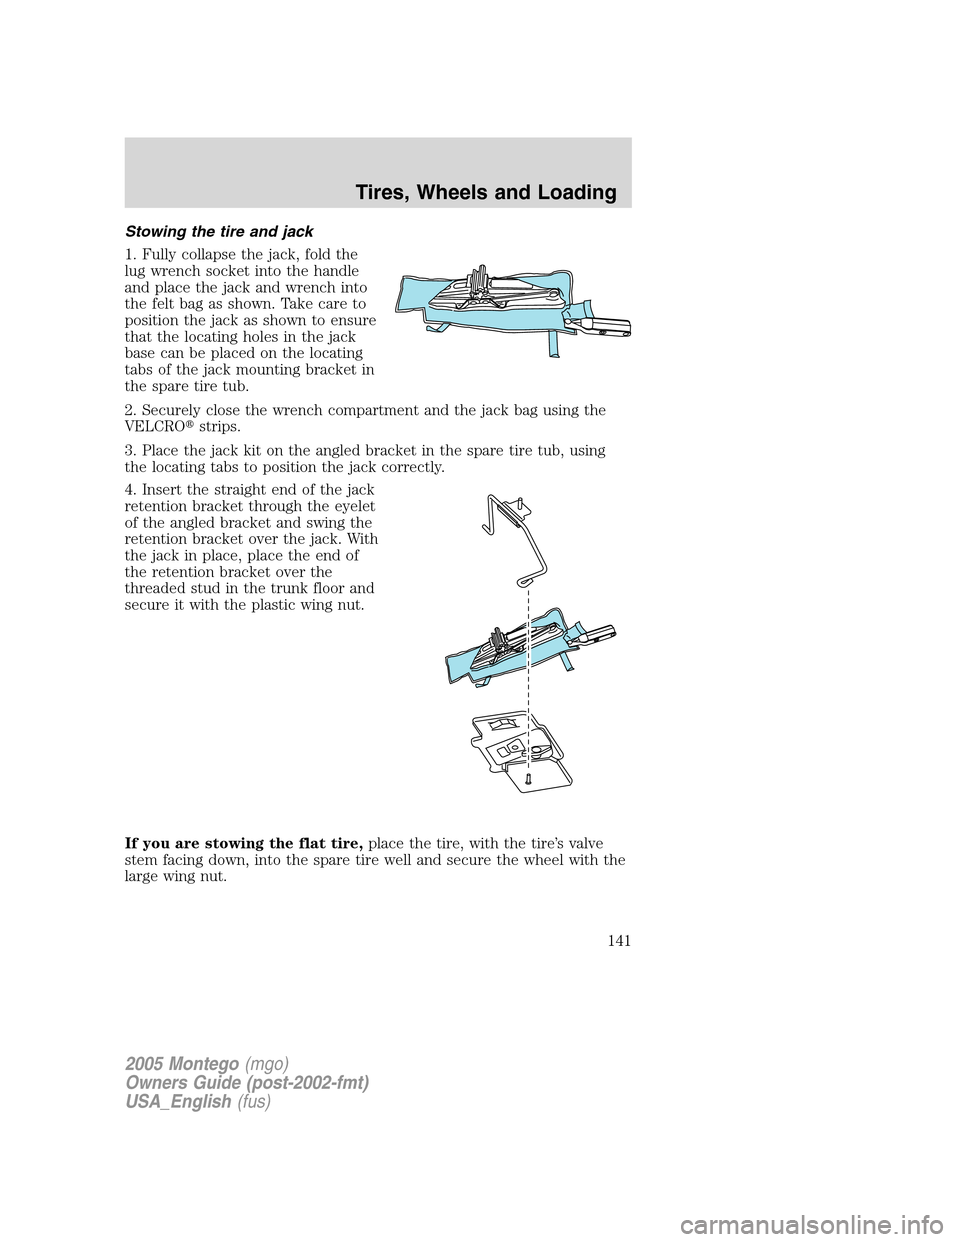 Mercury Montego 2005  Owners Manuals Stowing the tire and jack
1. Fully collapse the jack, fold the
lug wrench socket into the handle
and place the jack and wrench into
the felt bag as shown. Take care to
position the jack as shown to en